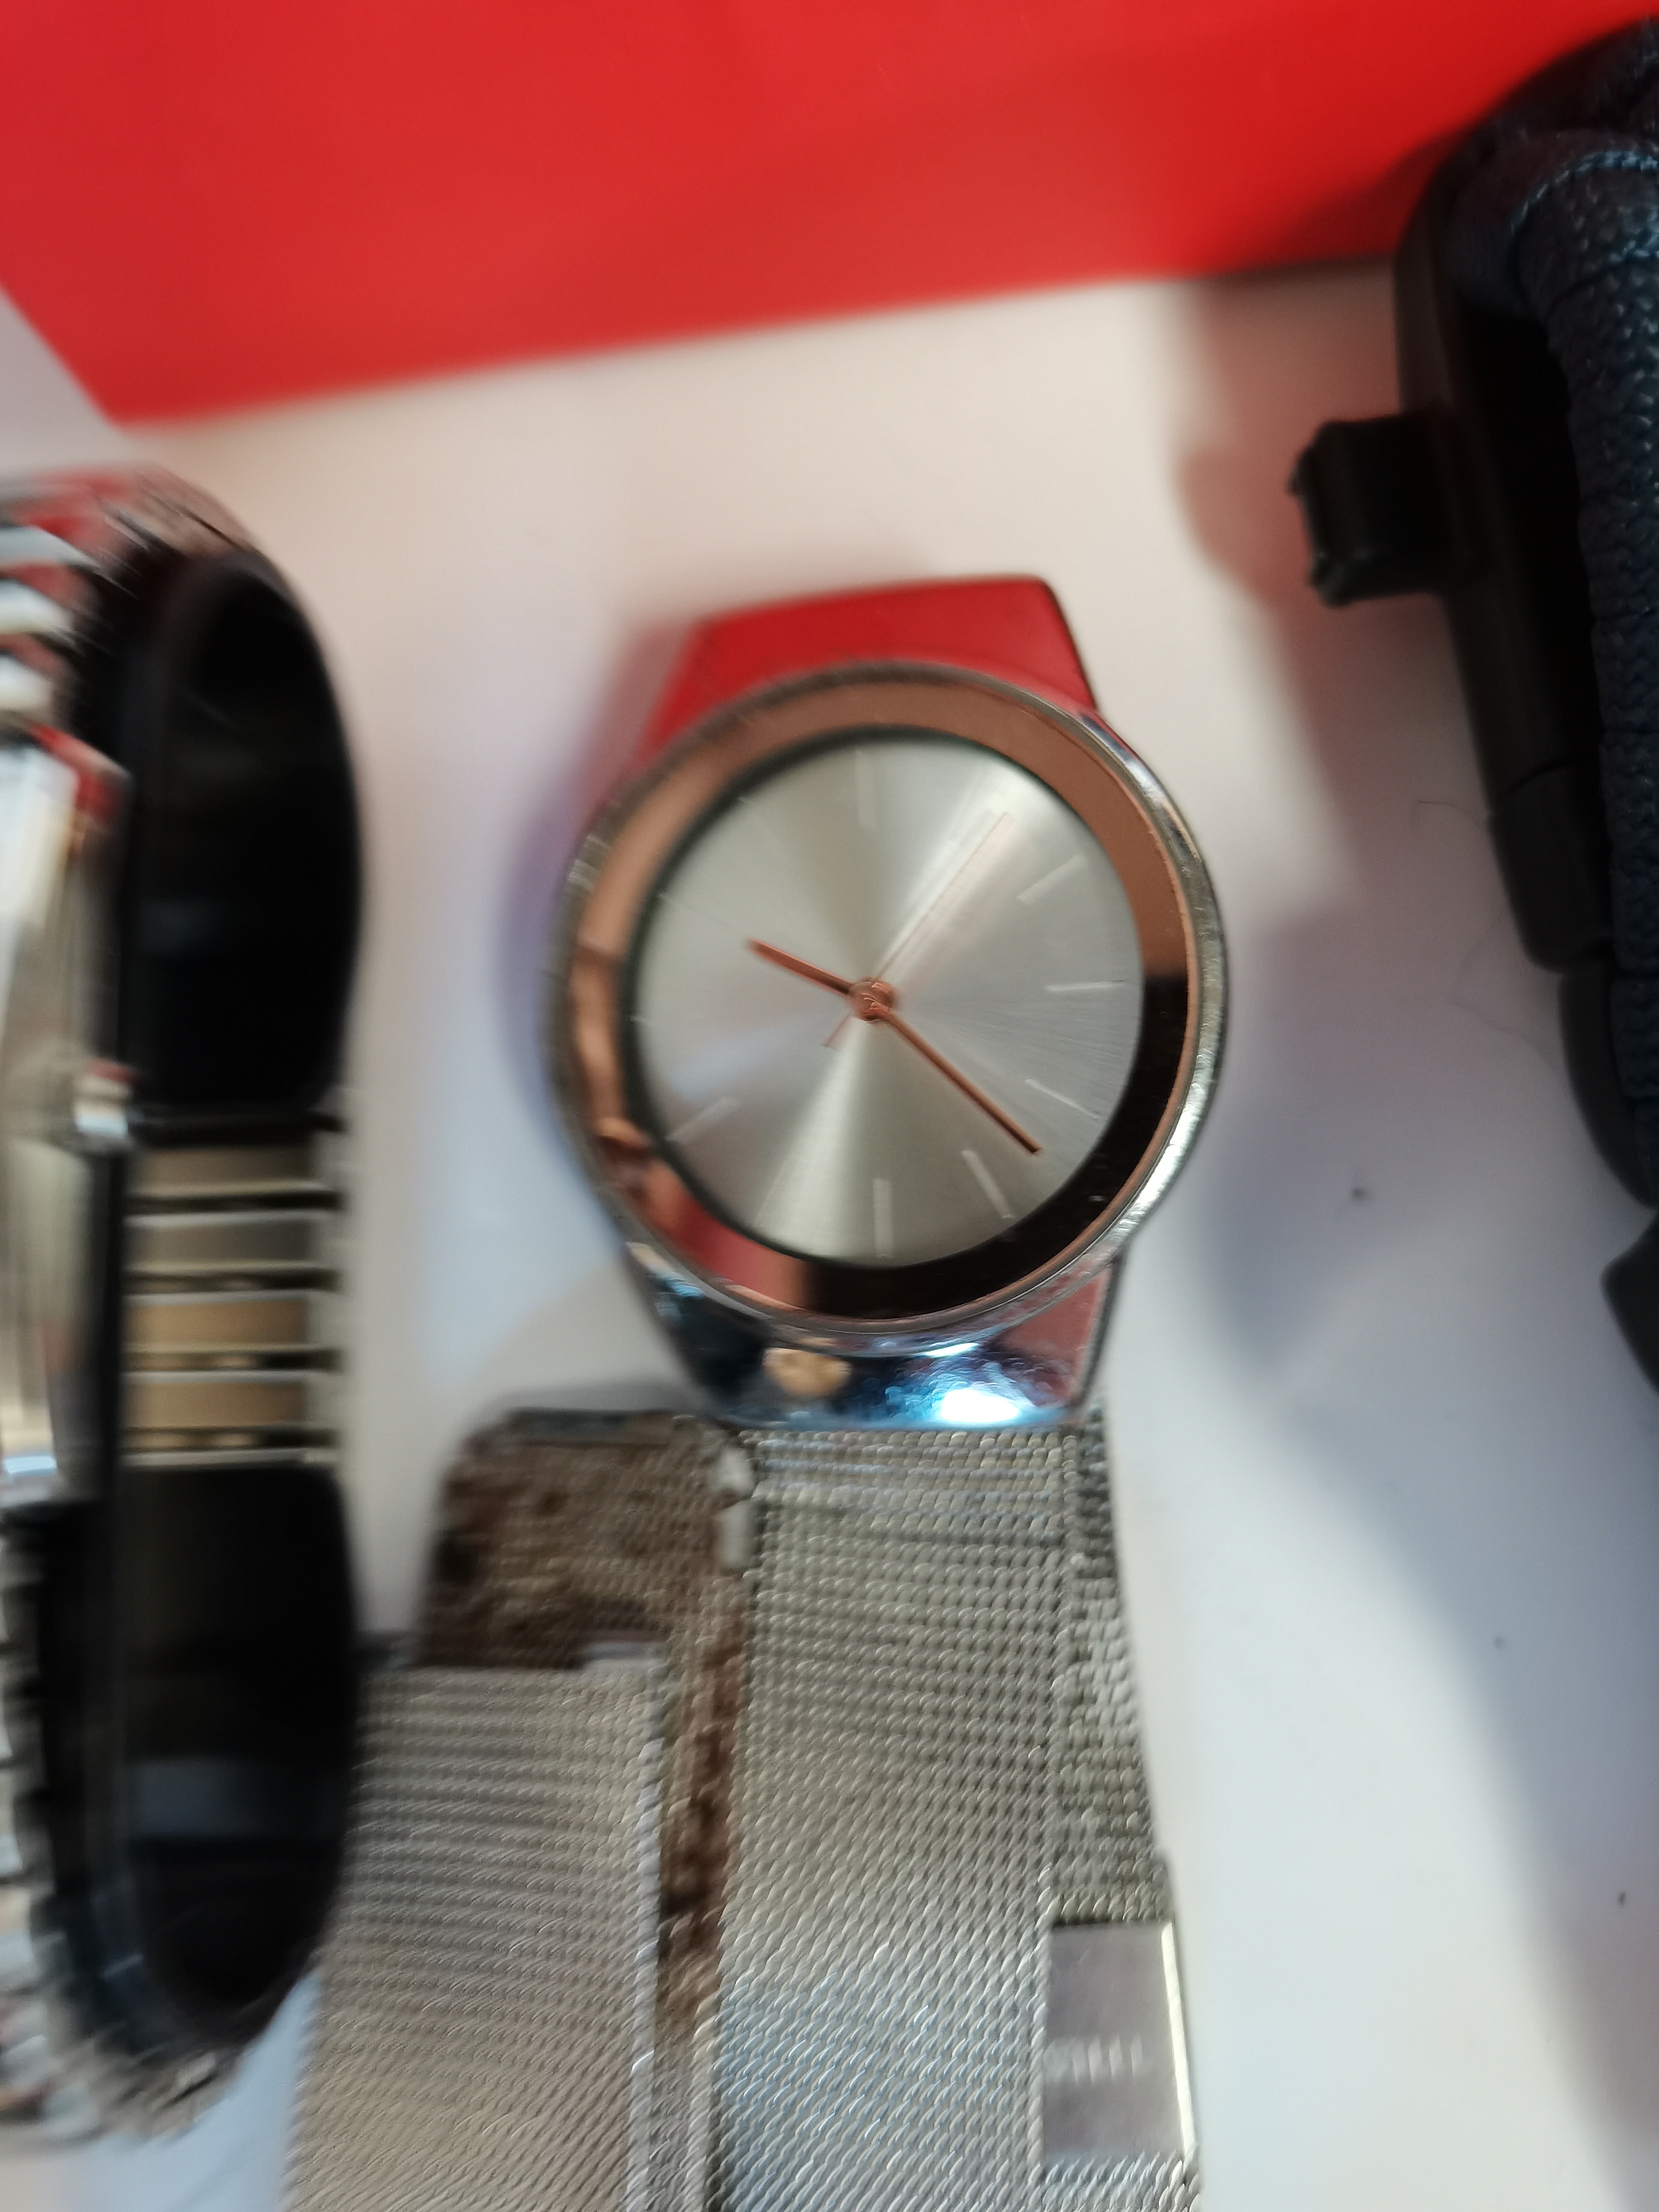 Watches, pens, photo frame etc - Image 10 of 18